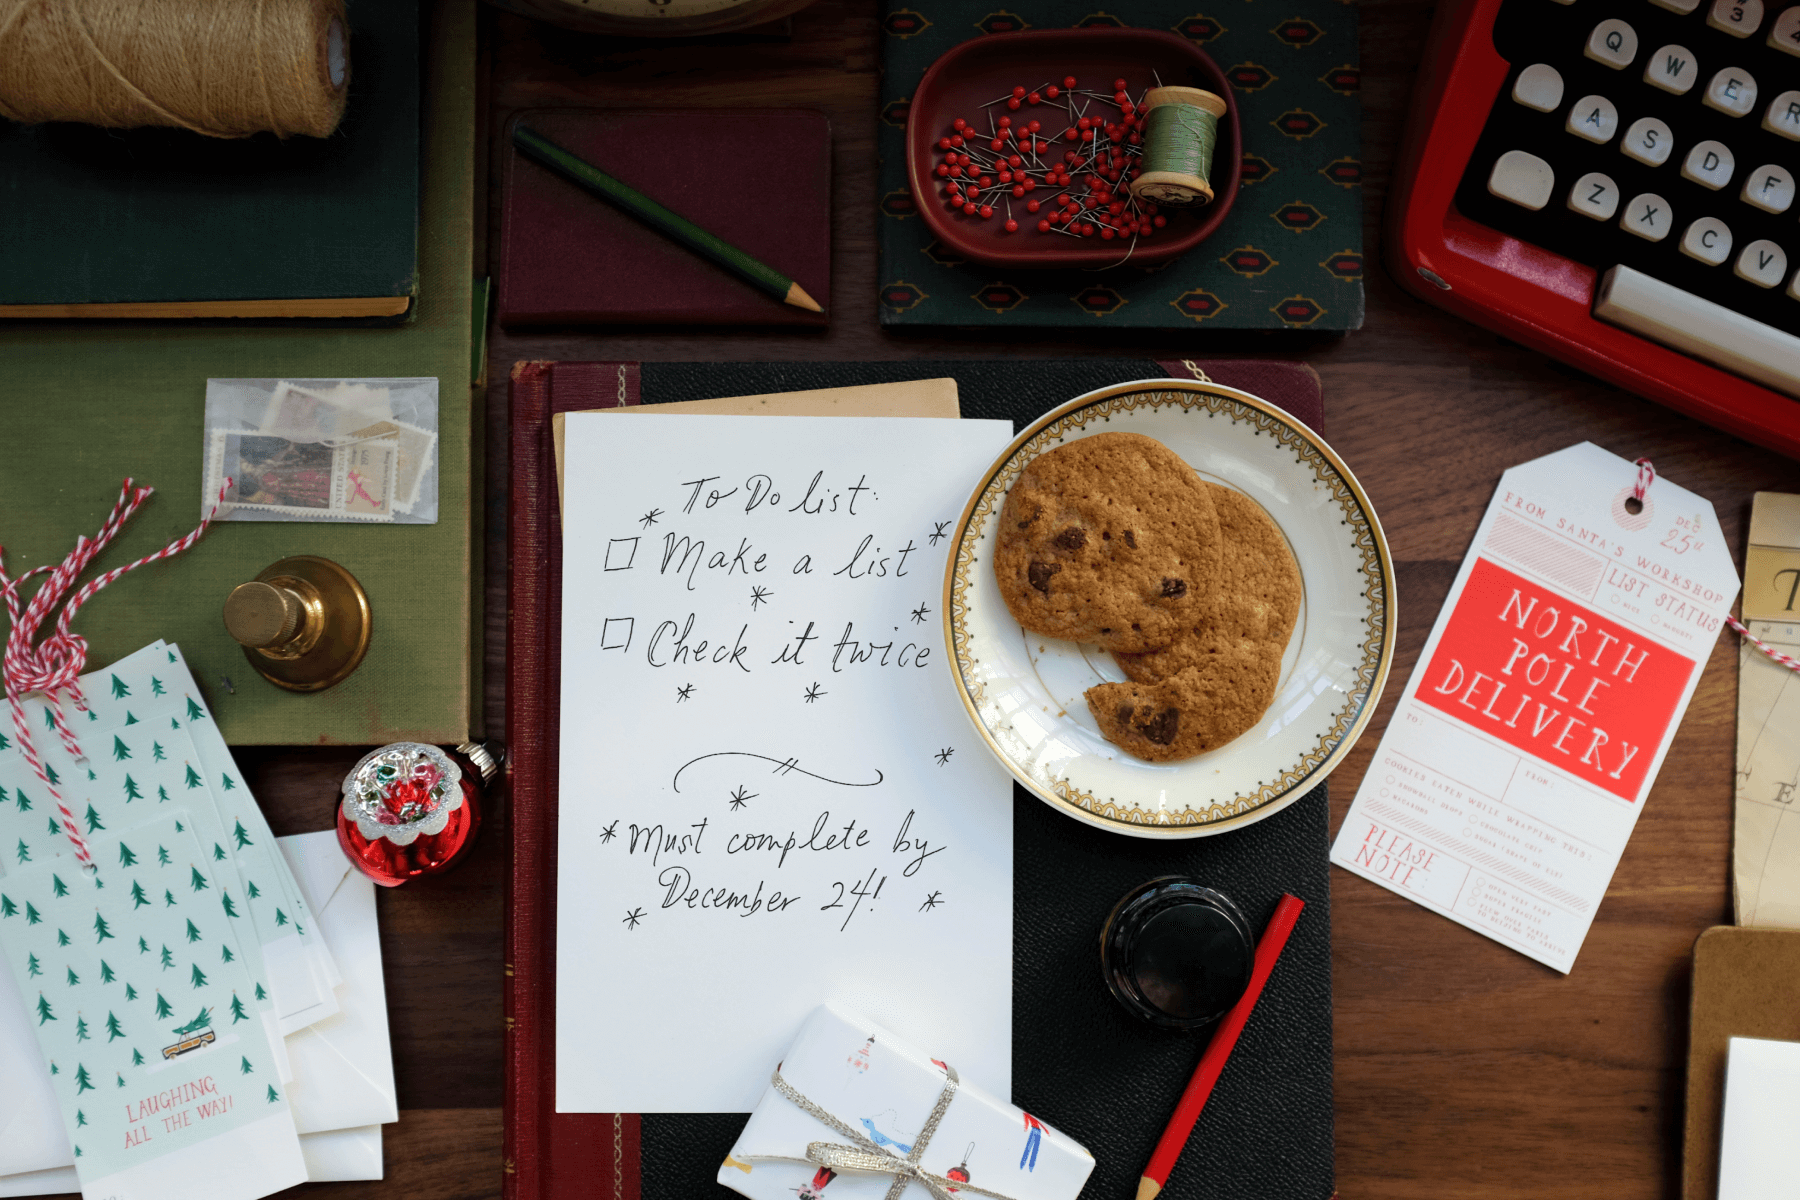 A to-do list reading “Make a list, check it twice” on what appears to be a desk belonging to Santa Claus, surrounded by cookies, a North Pole delivery tag, small wrapped gifts, and a red typewriter.